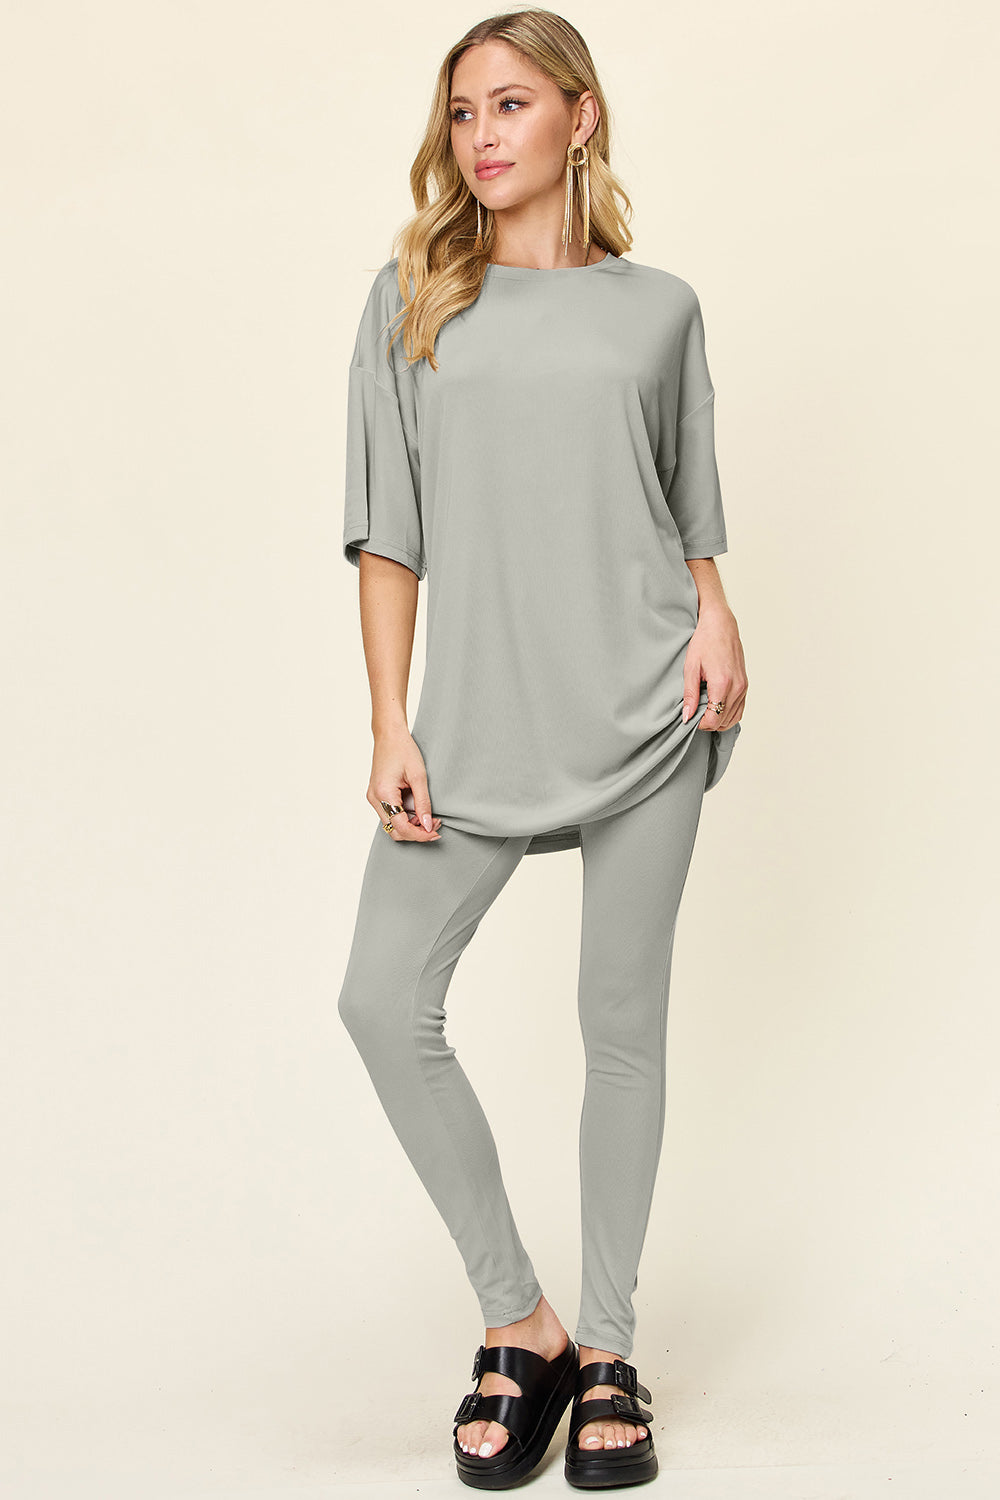 Double Take Full Size Round Neck Dropped Shoulder T-Shirt and Leggings Set